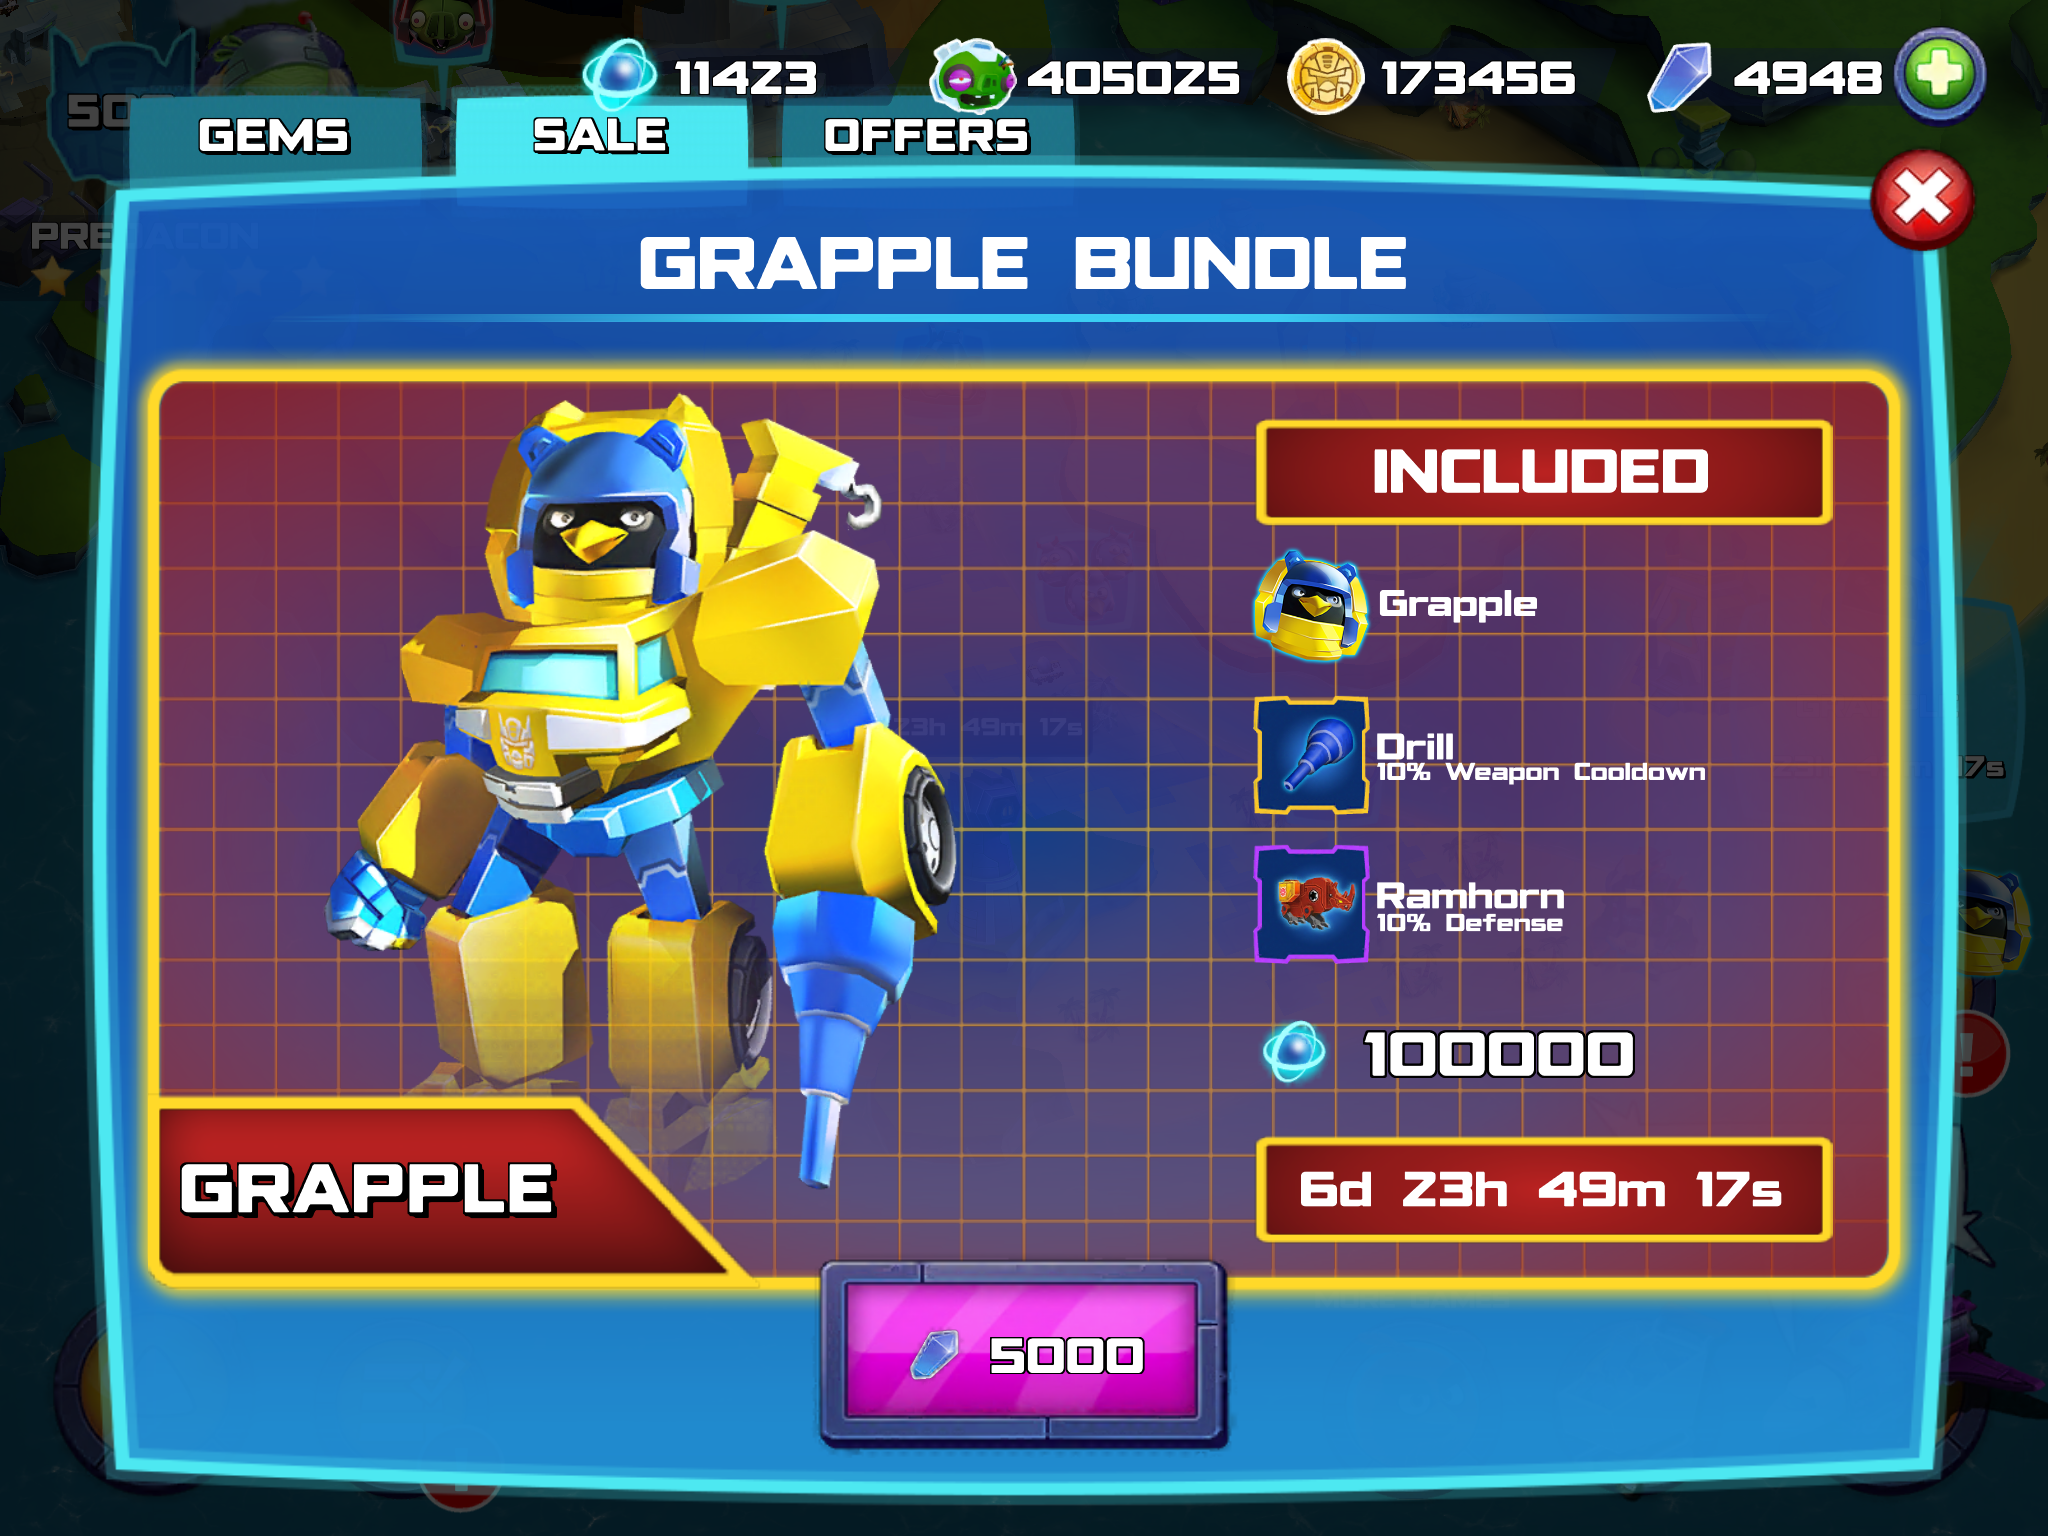 Ridiculous Grapple Bundle Offer